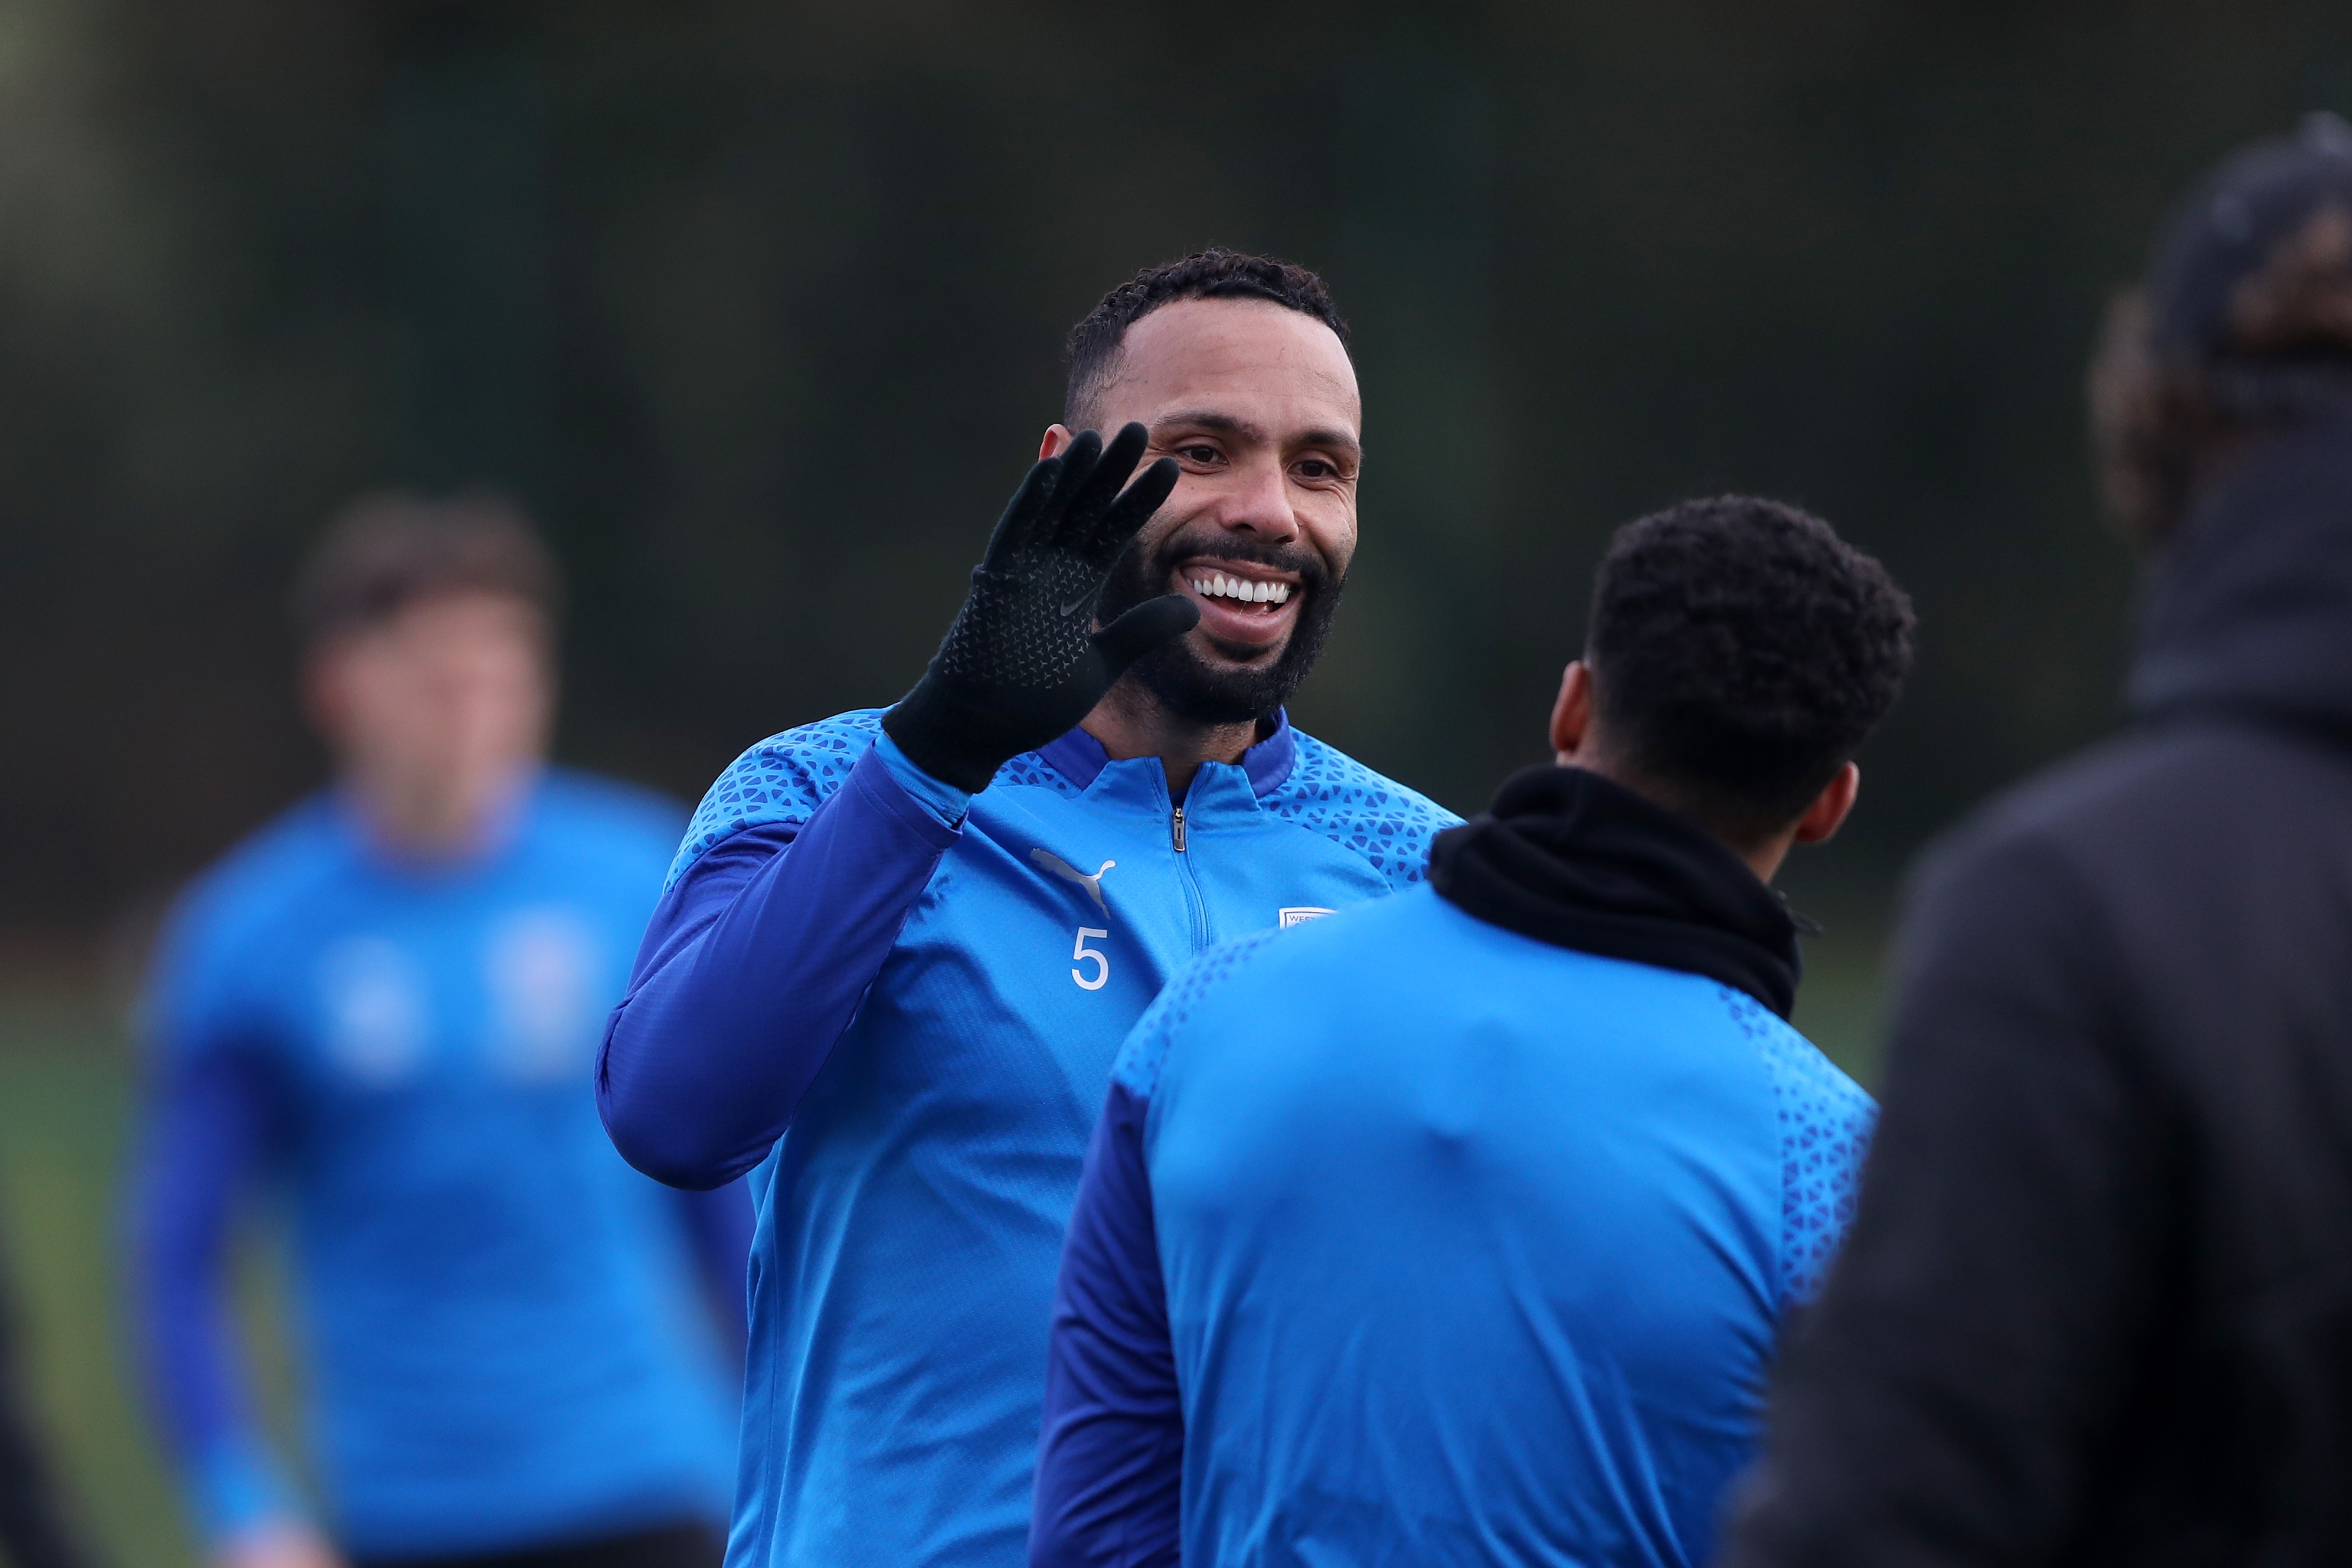 Kyle Bartley smiling during training 